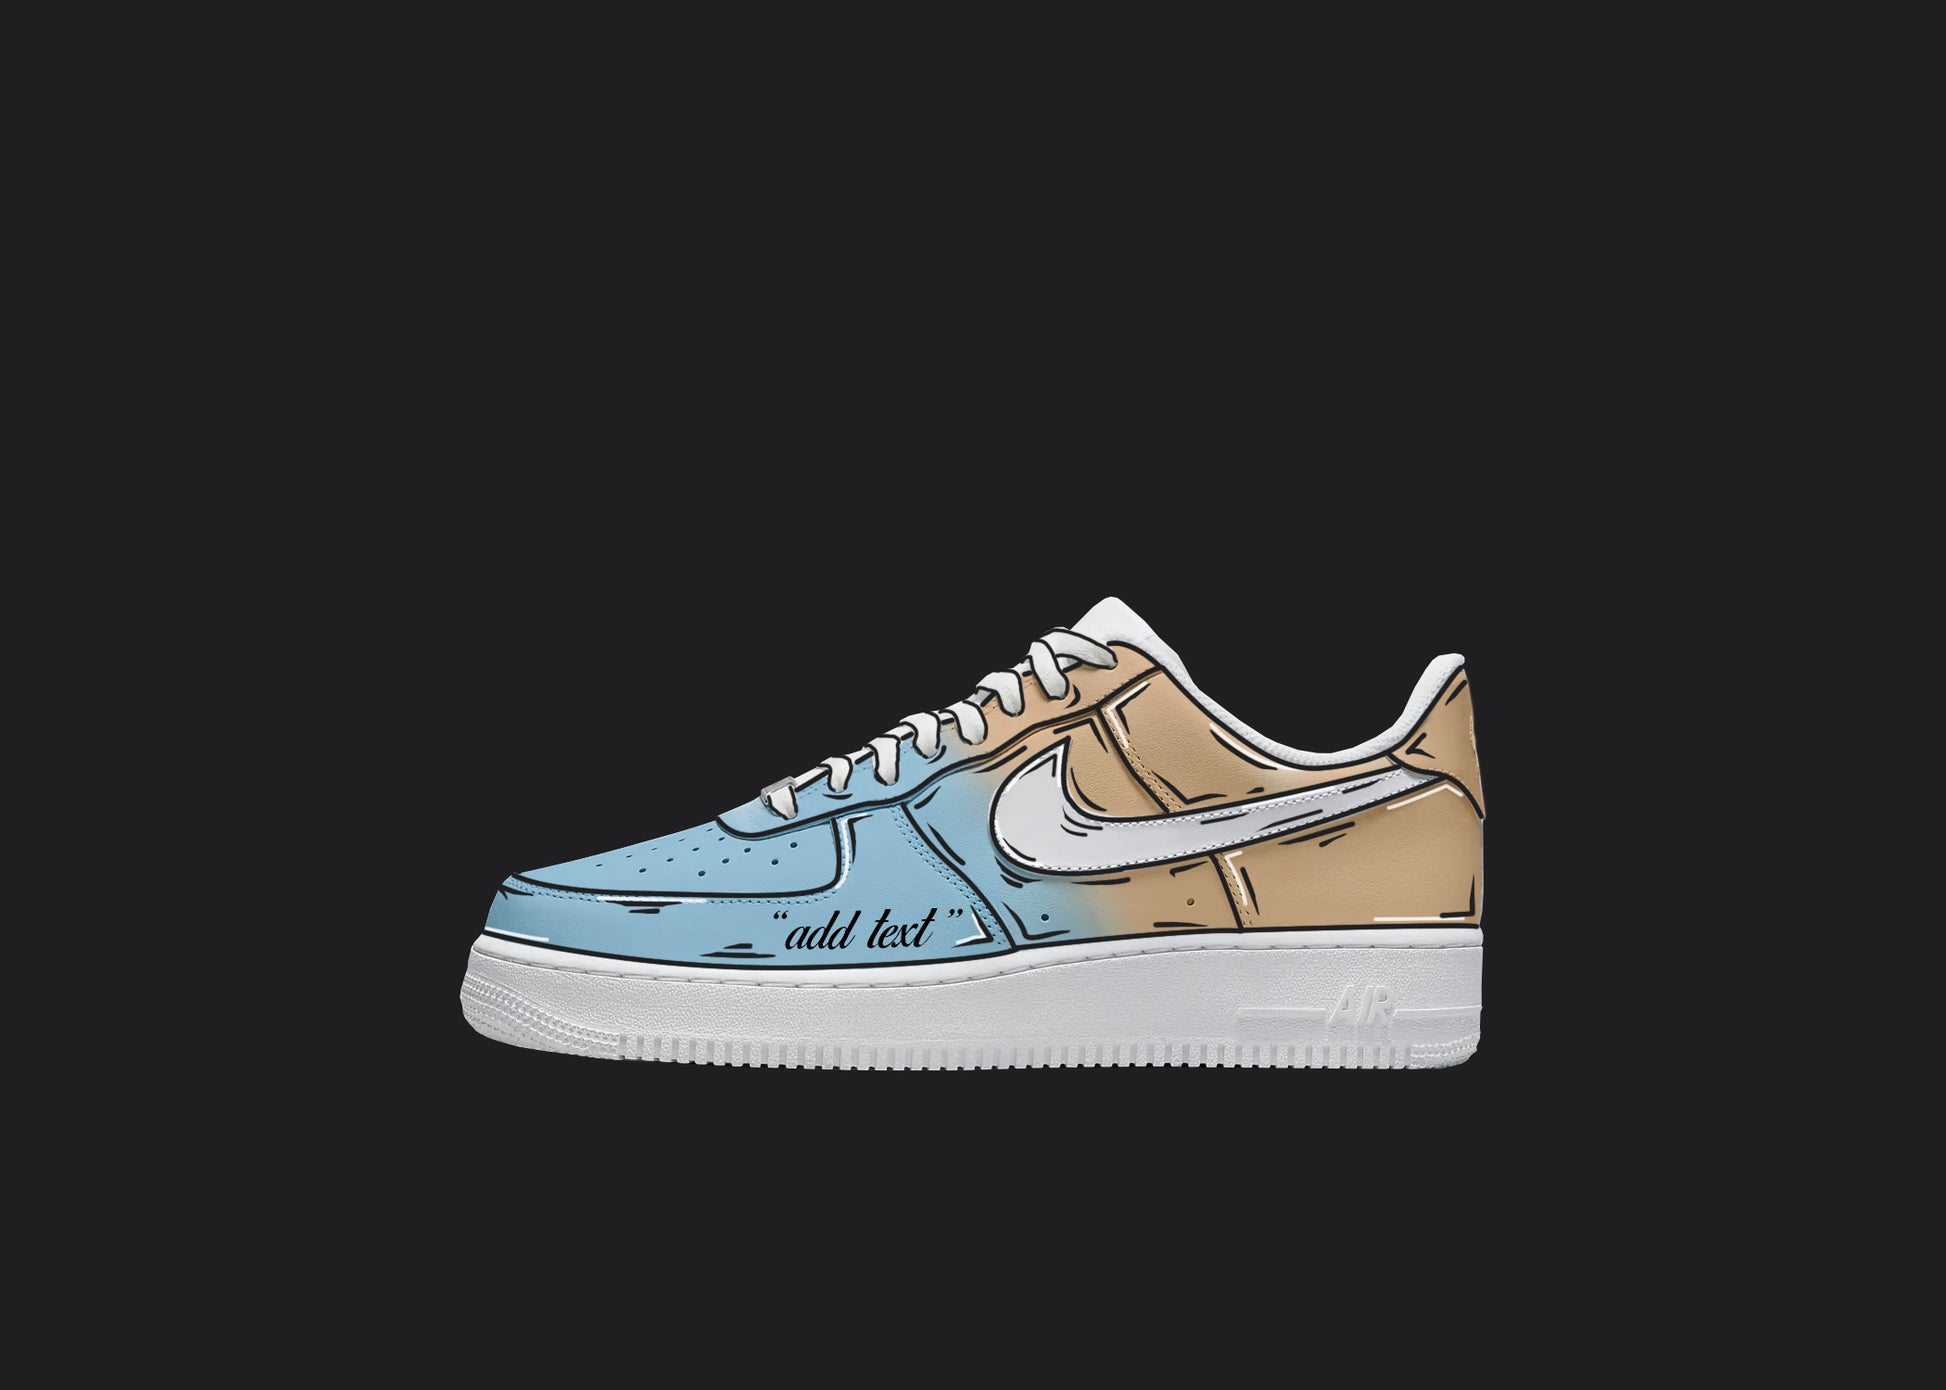 blue and orange fade custom air force 1s with cartoon details all over the sneakers